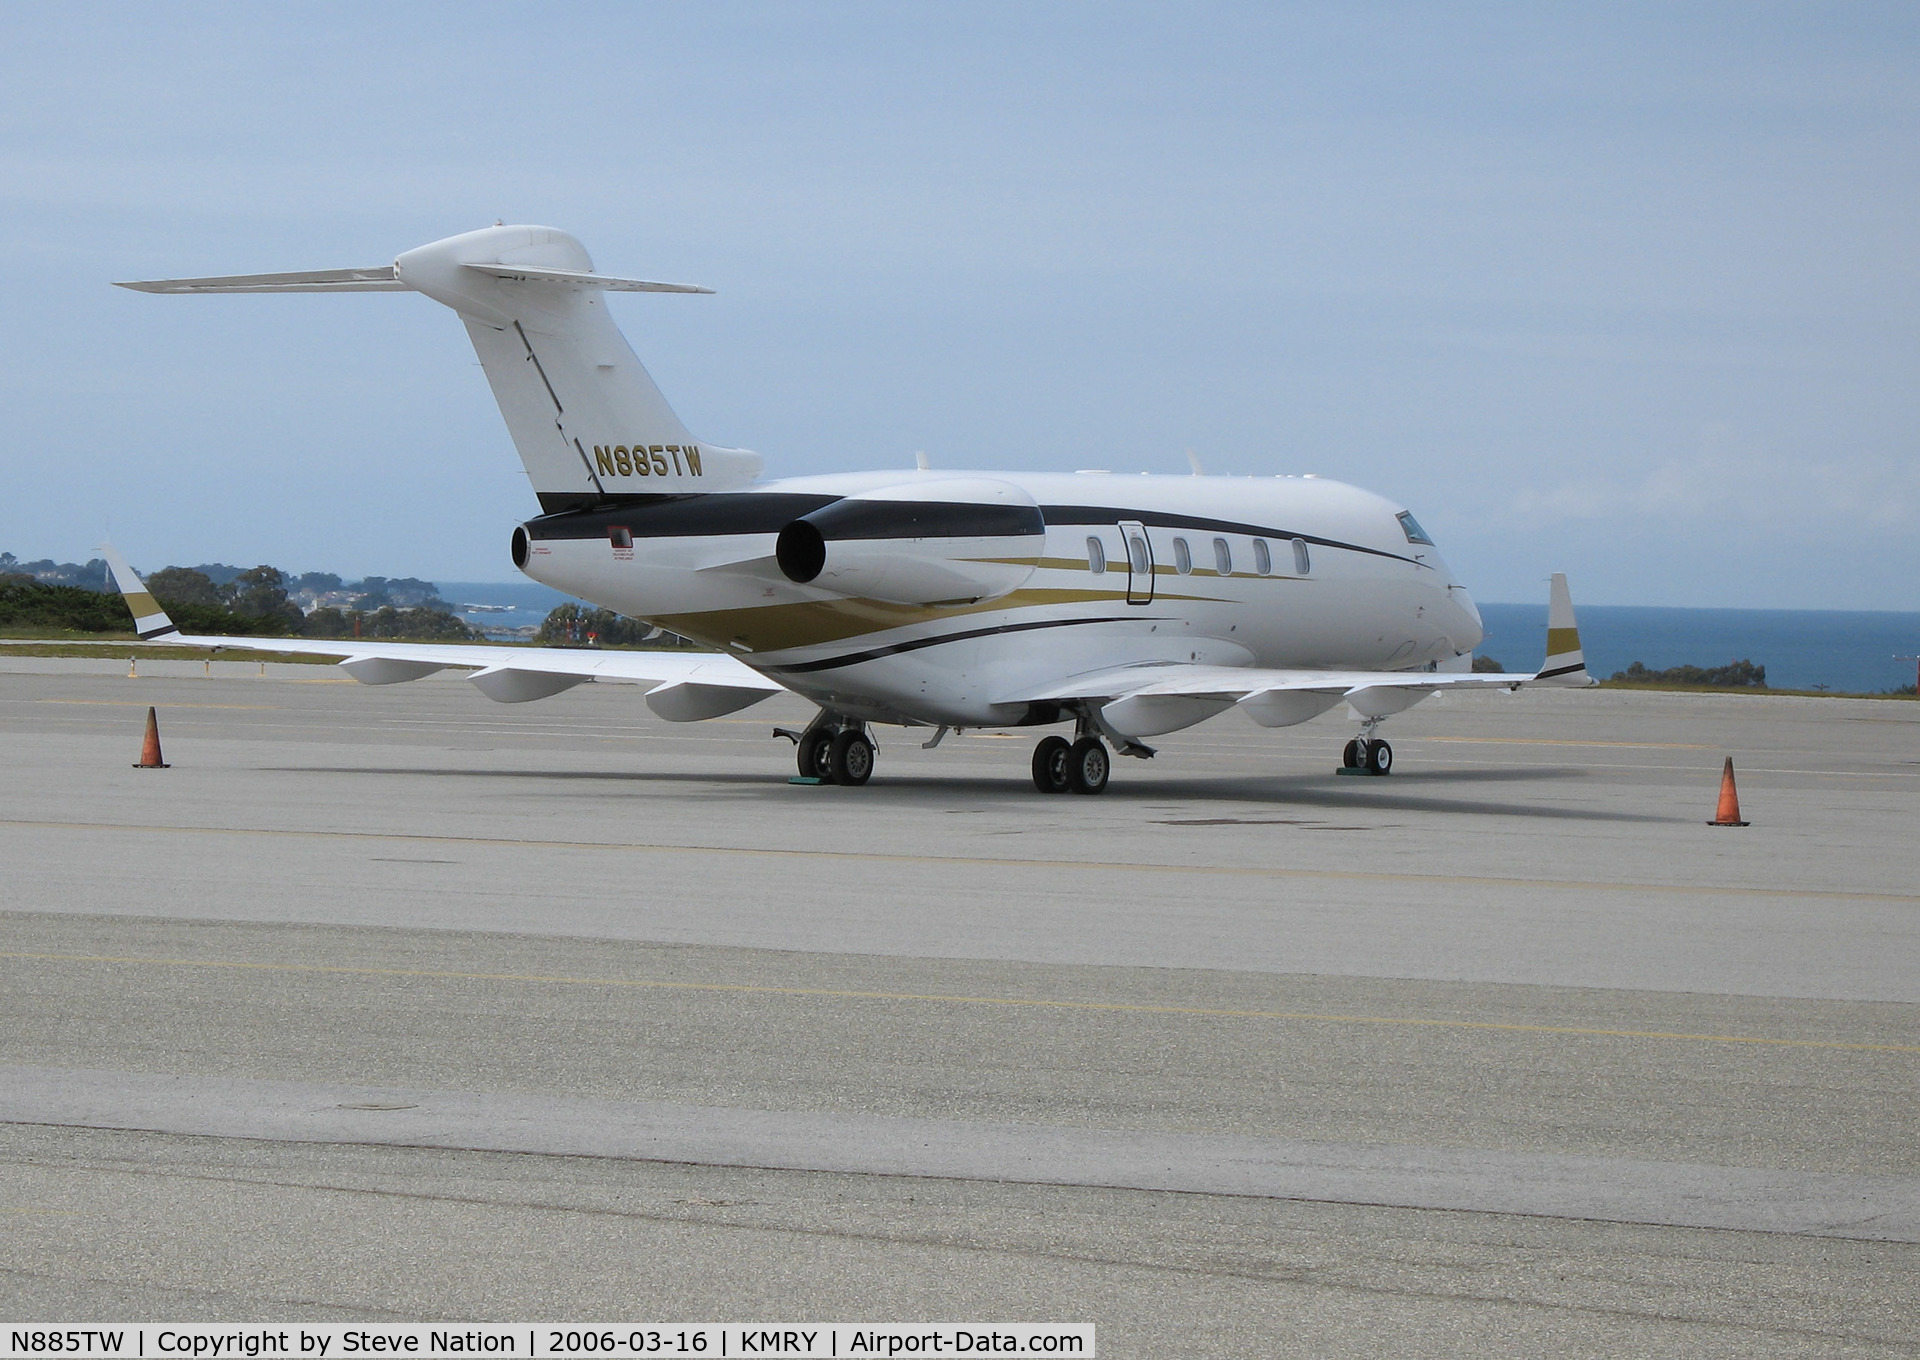 N885TW, 2004 Bombardier Challenger 300 (BD-100-1A10) C/N 20037, 2004 Bombardier BD-100-1A10 @ Monterey Penisula Airport, CA